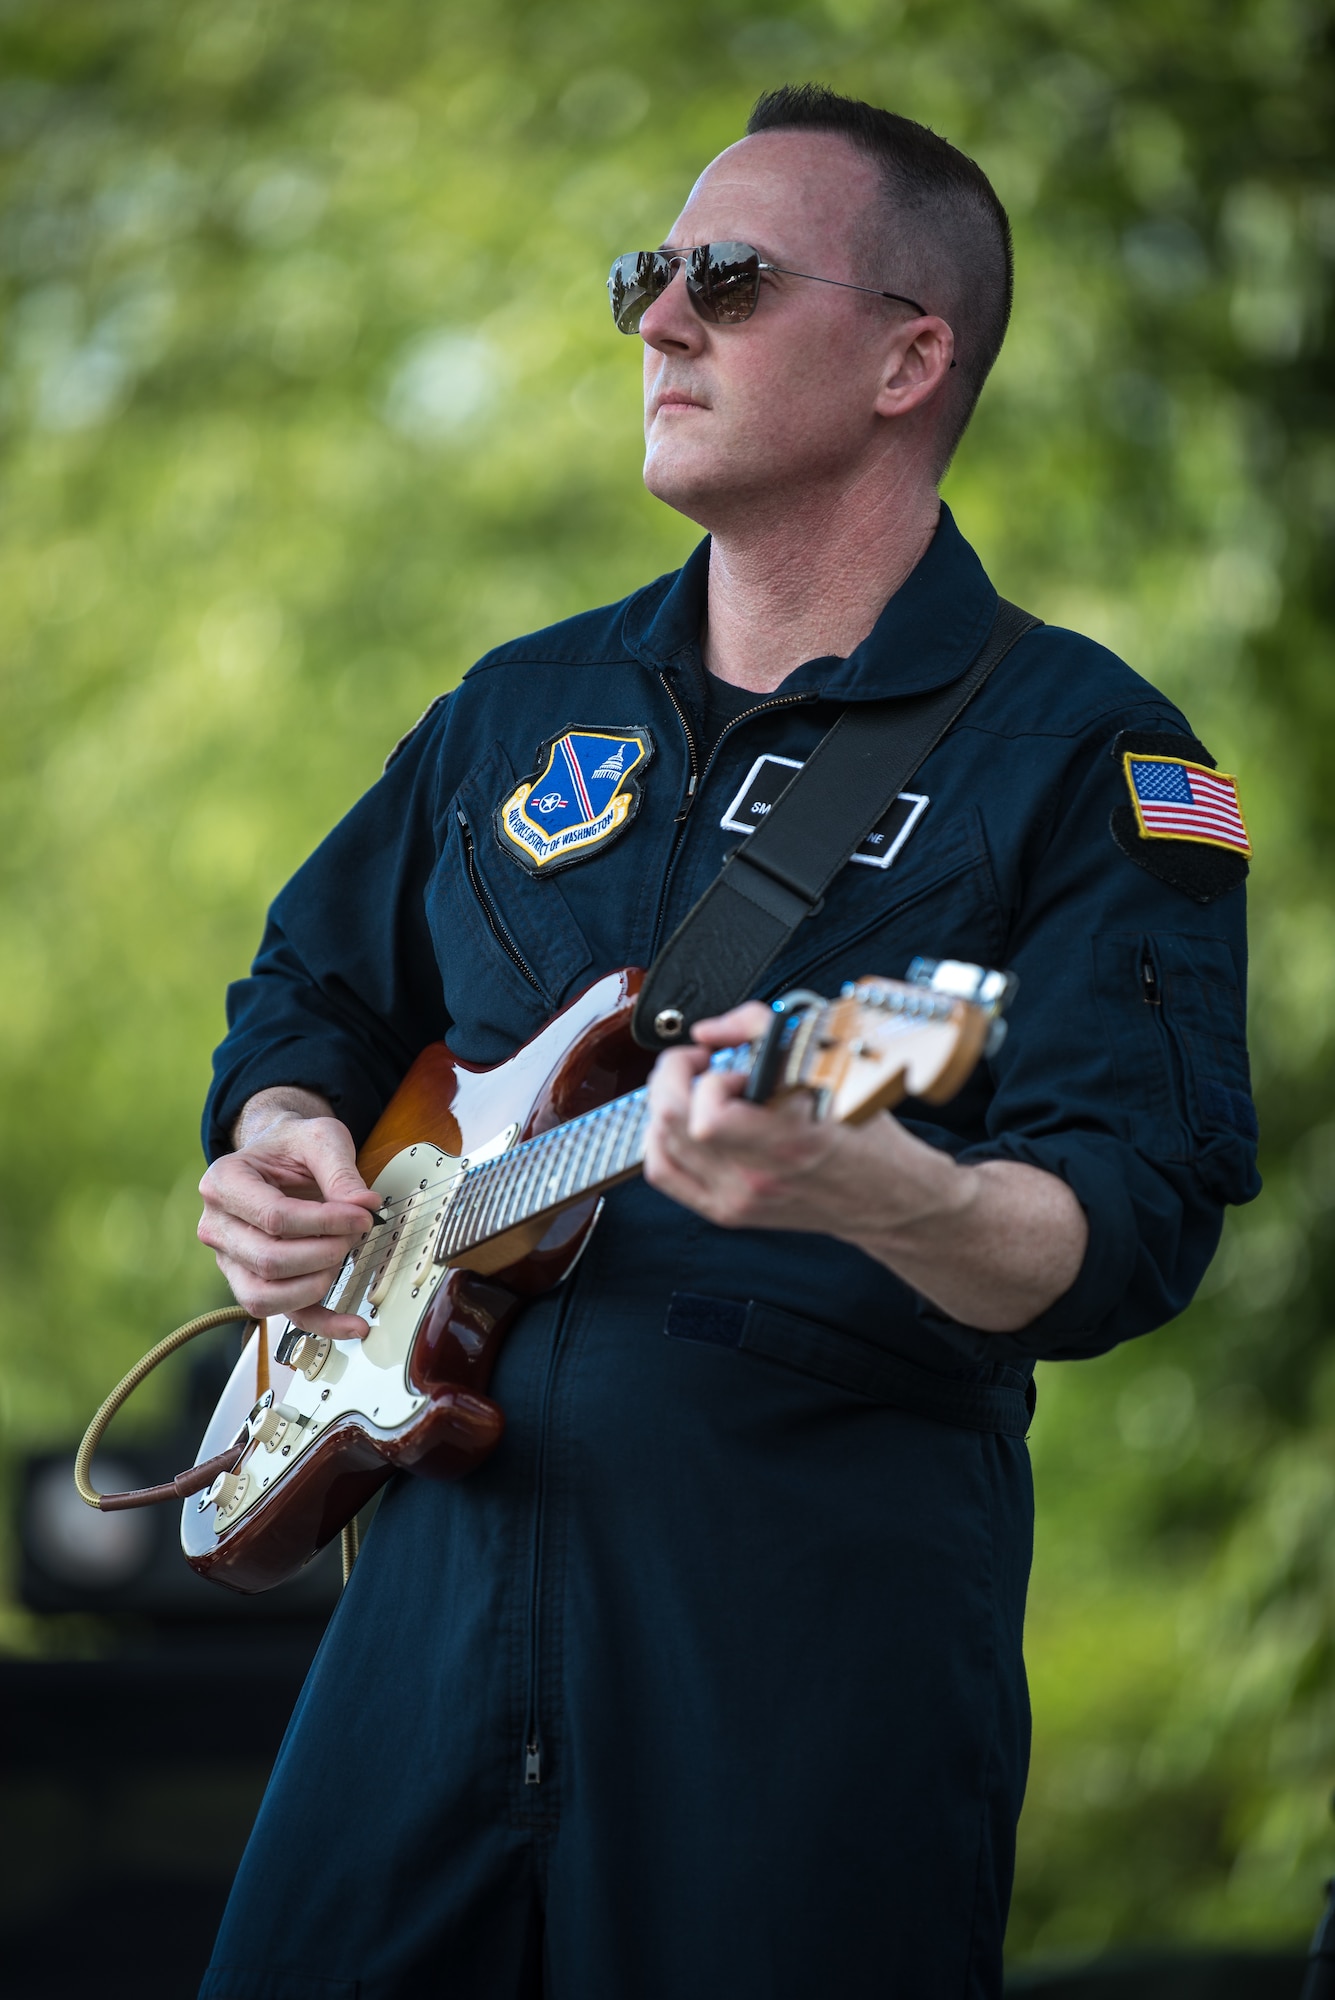 Senior Master Sgt. Matt Ascione, guitarist for Max Impact, performs for thousands of country music fans as part of the Armed Forces Tribute at the 2019 Suwannee River Jam. This event took place at the Spirit of the Suwannee Music Park on Saturday, May 4, 2019.